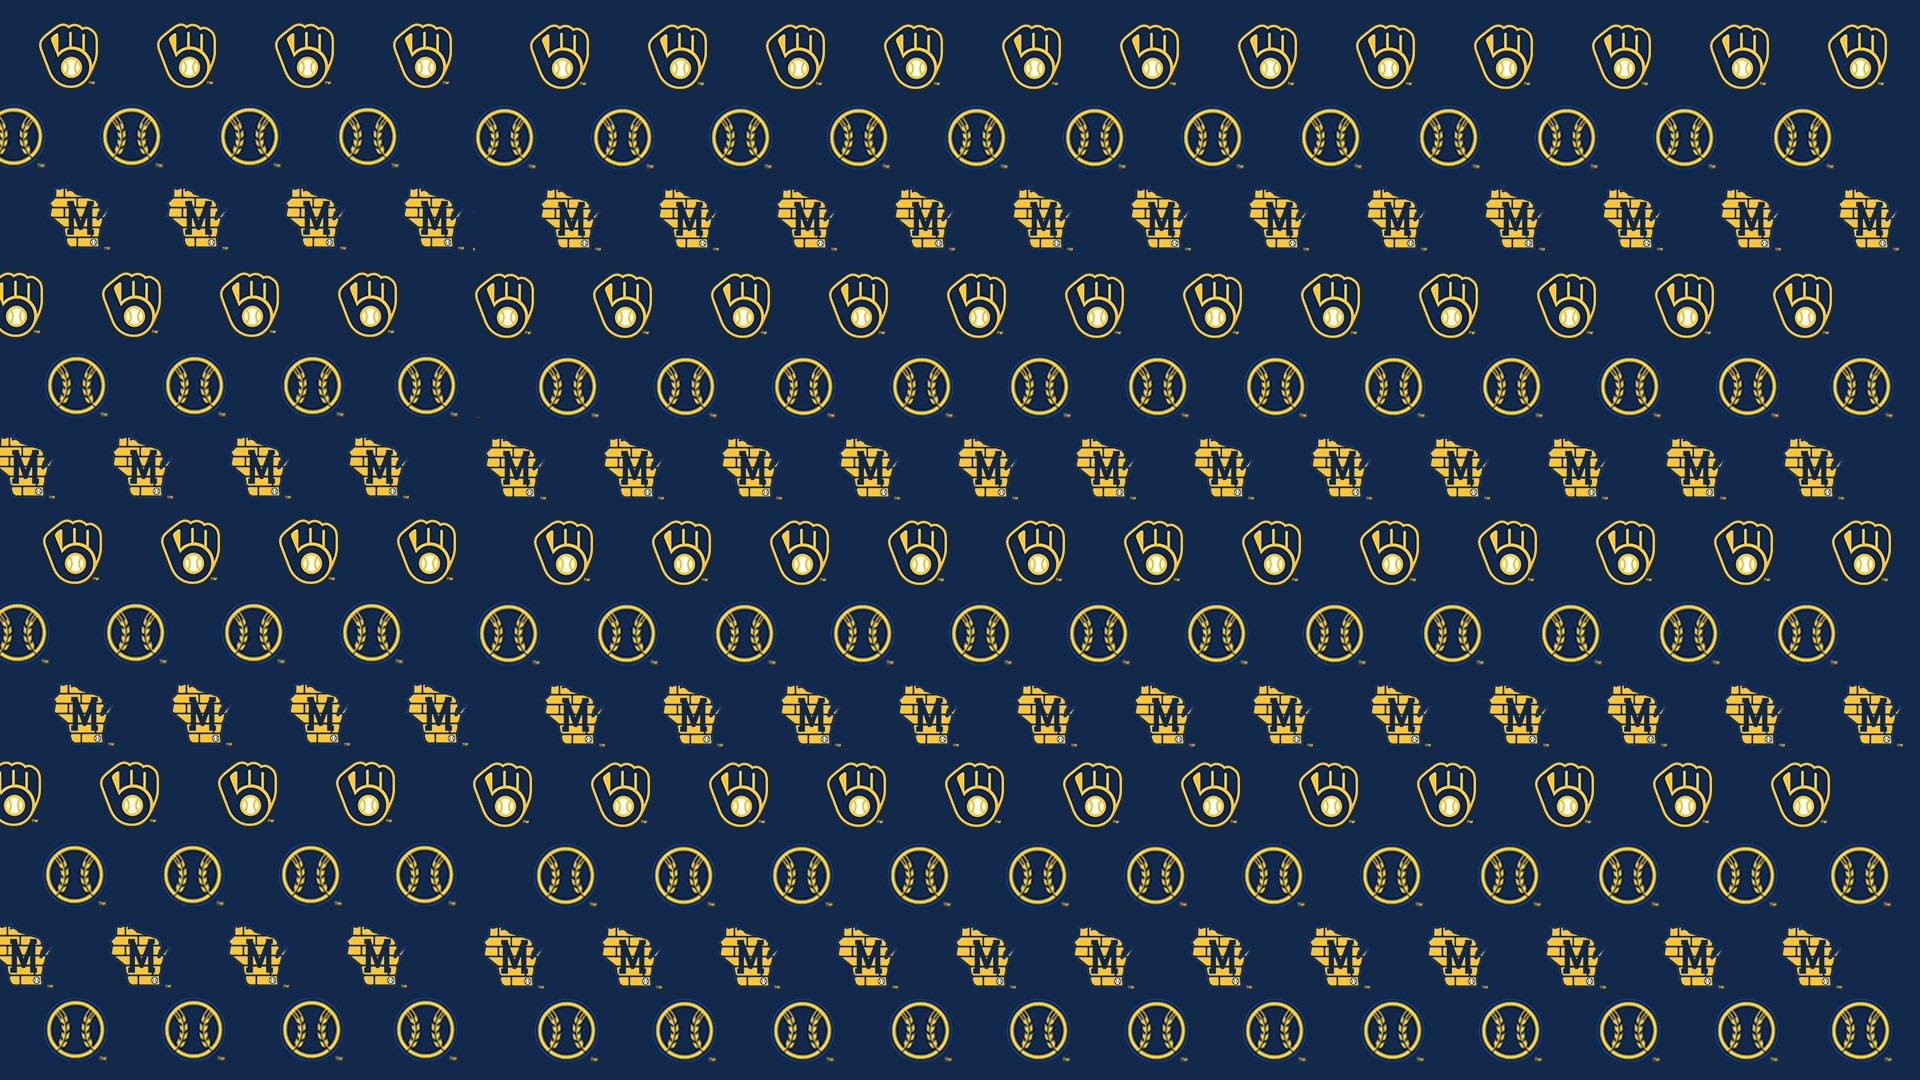 HD Backgrounds Milwaukee Brewers MLB With high-resolution 1920X1080 pixel. You can use this wallpaper for Mac Desktop Wallpaper, Laptop Screensavers, Android Wallpapers, Tablet or iPhone Home Screen and another mobile phone device